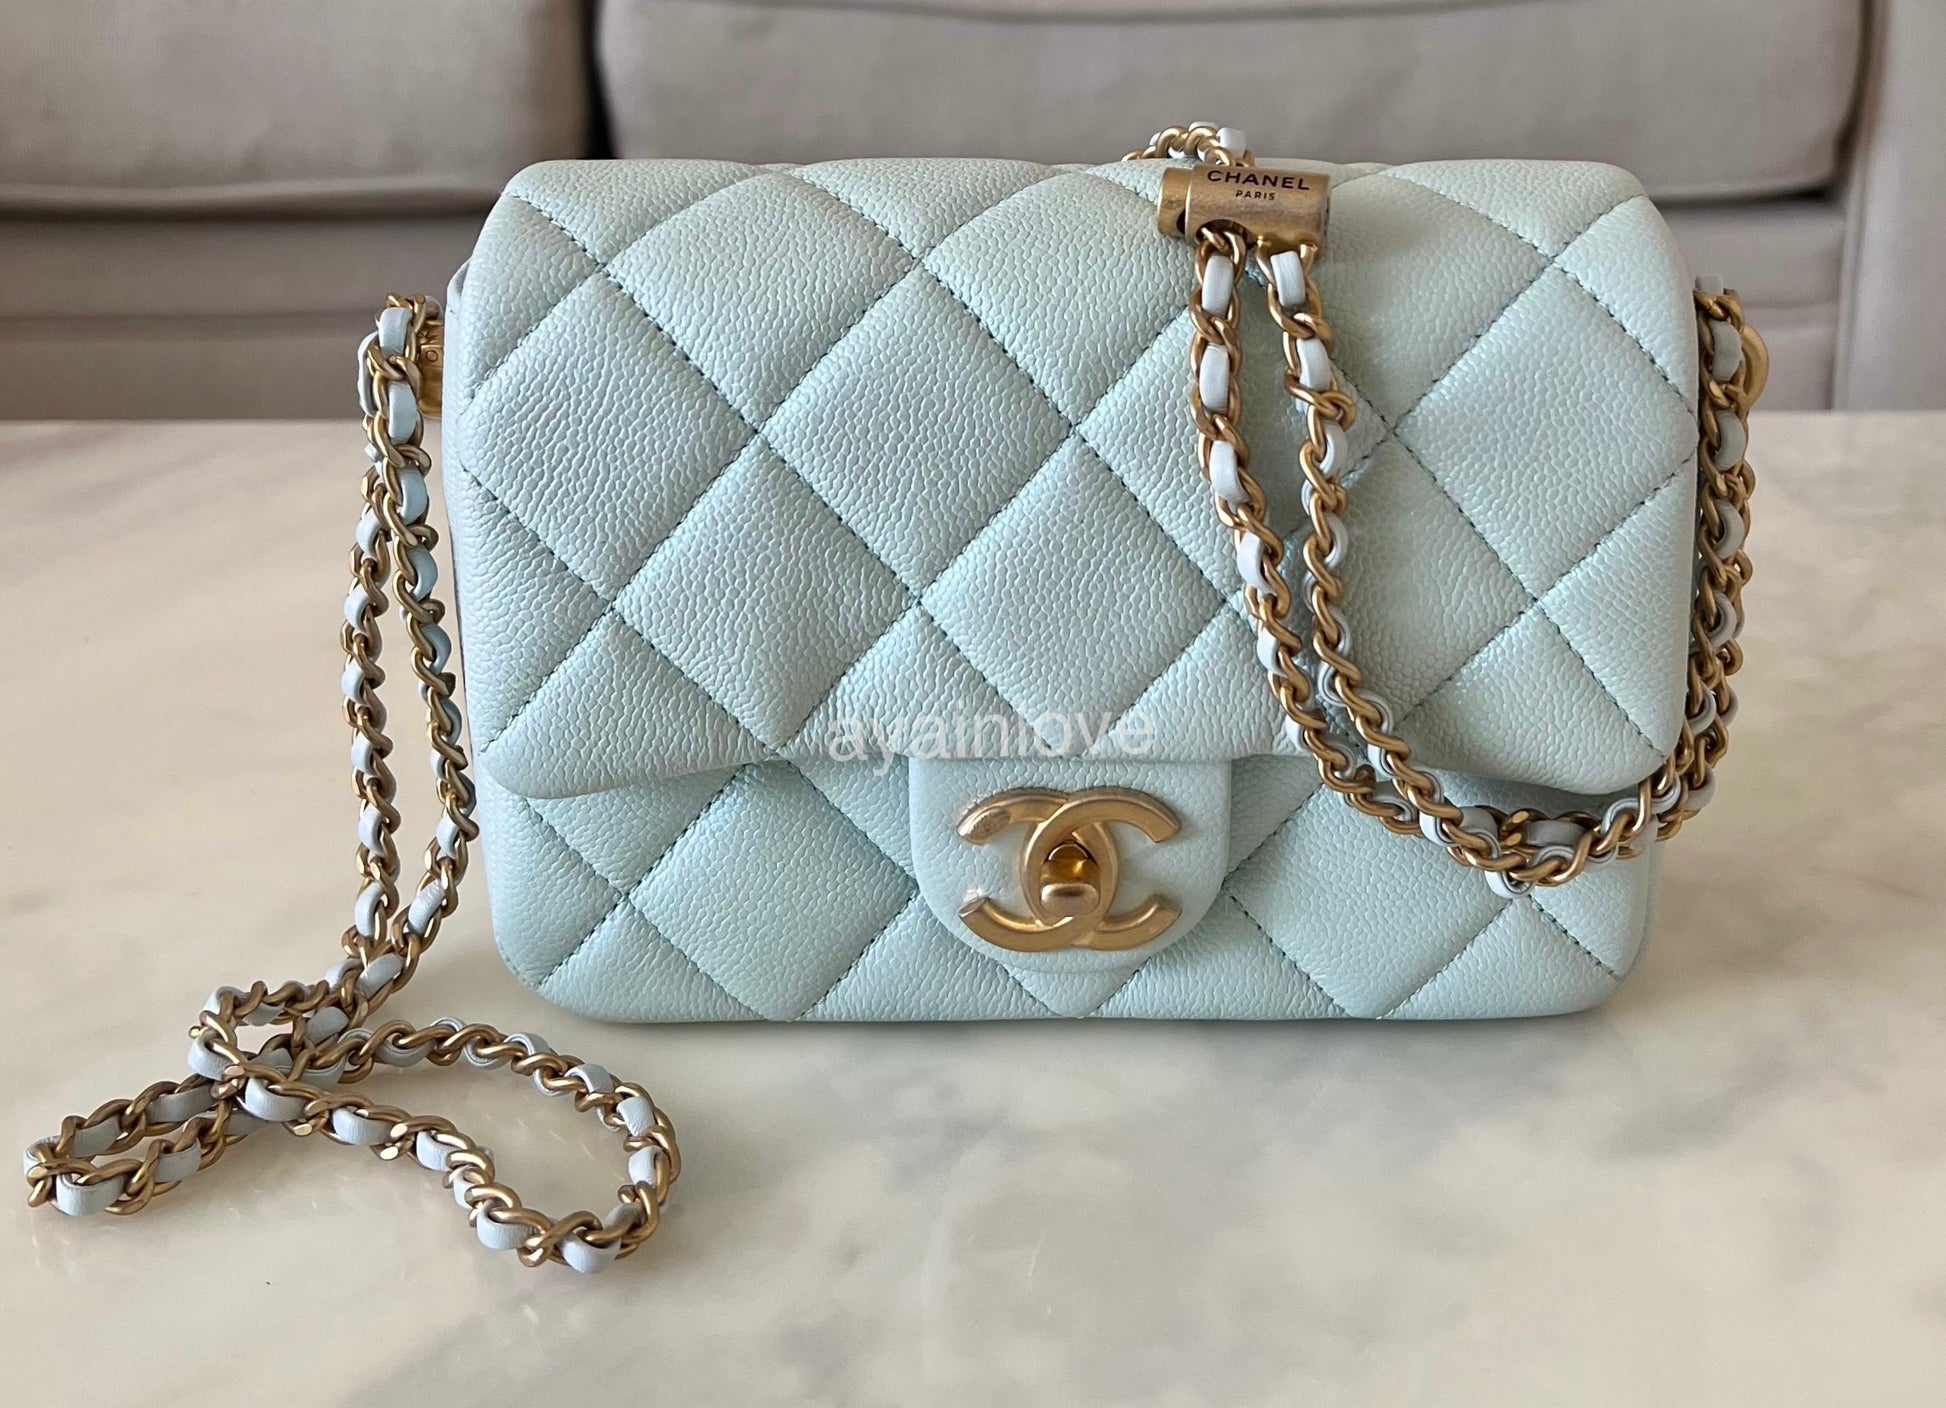 Chanel Blue bag🦋🦋🦋, Gallery posted by Vivian💗💗💗